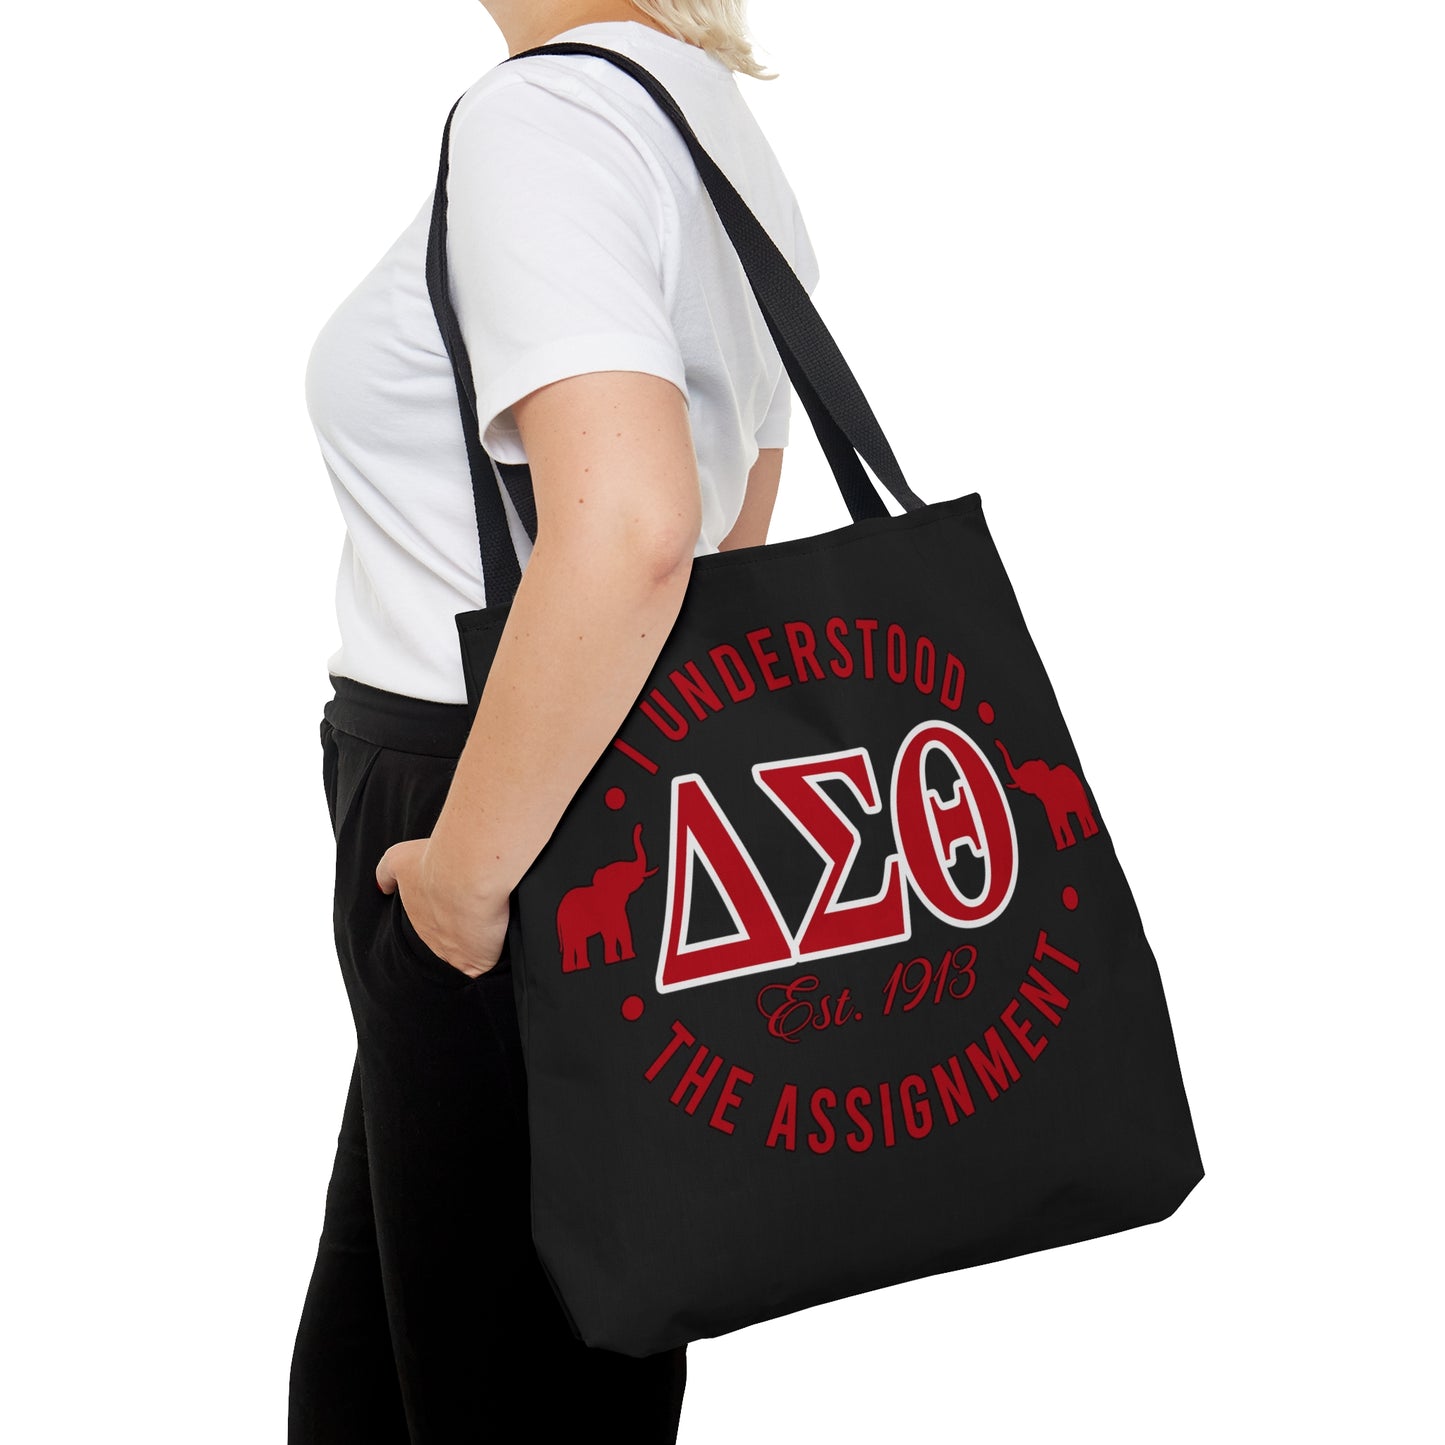 DST Understood the Assignment Tote Bag